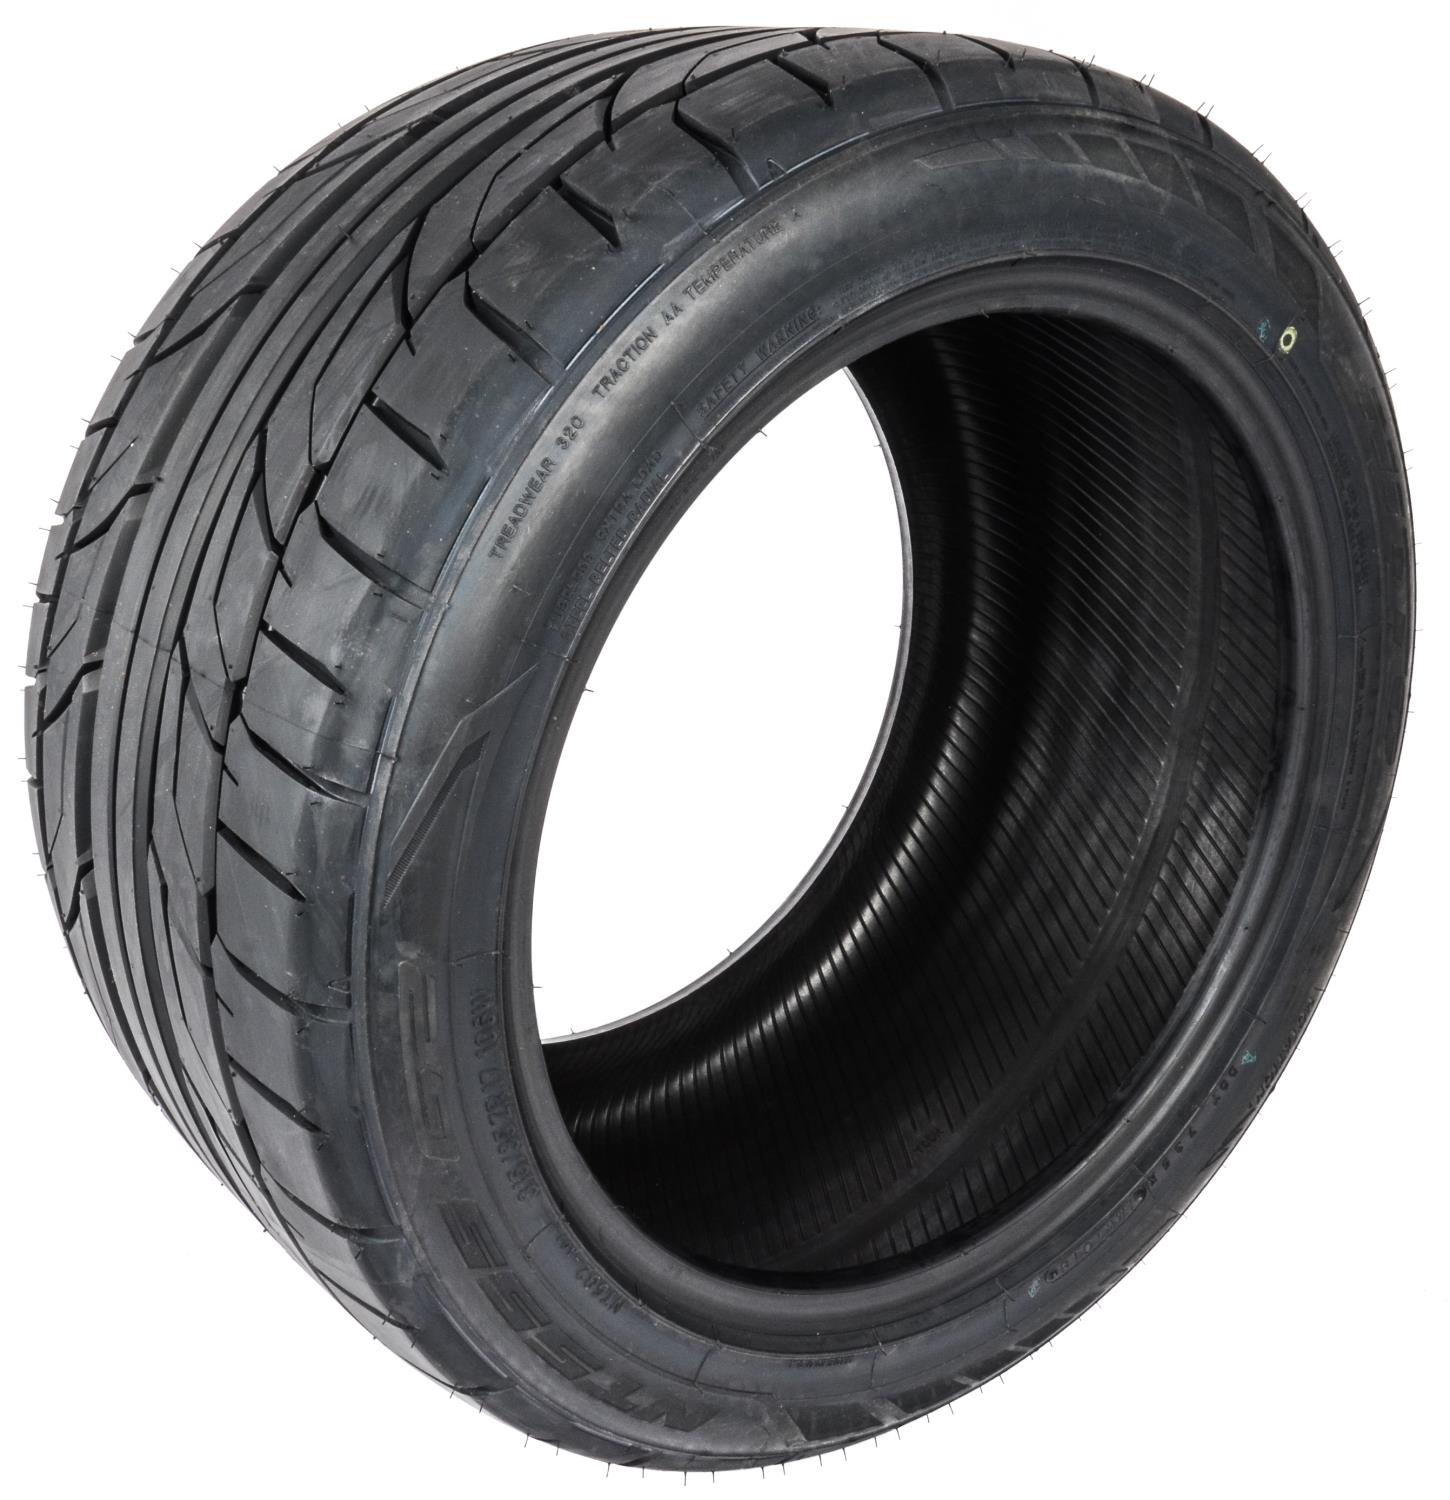 NITTO Tire NT555 G2 315/35-17 Summer Ultra High Performance Radial Tire 211340